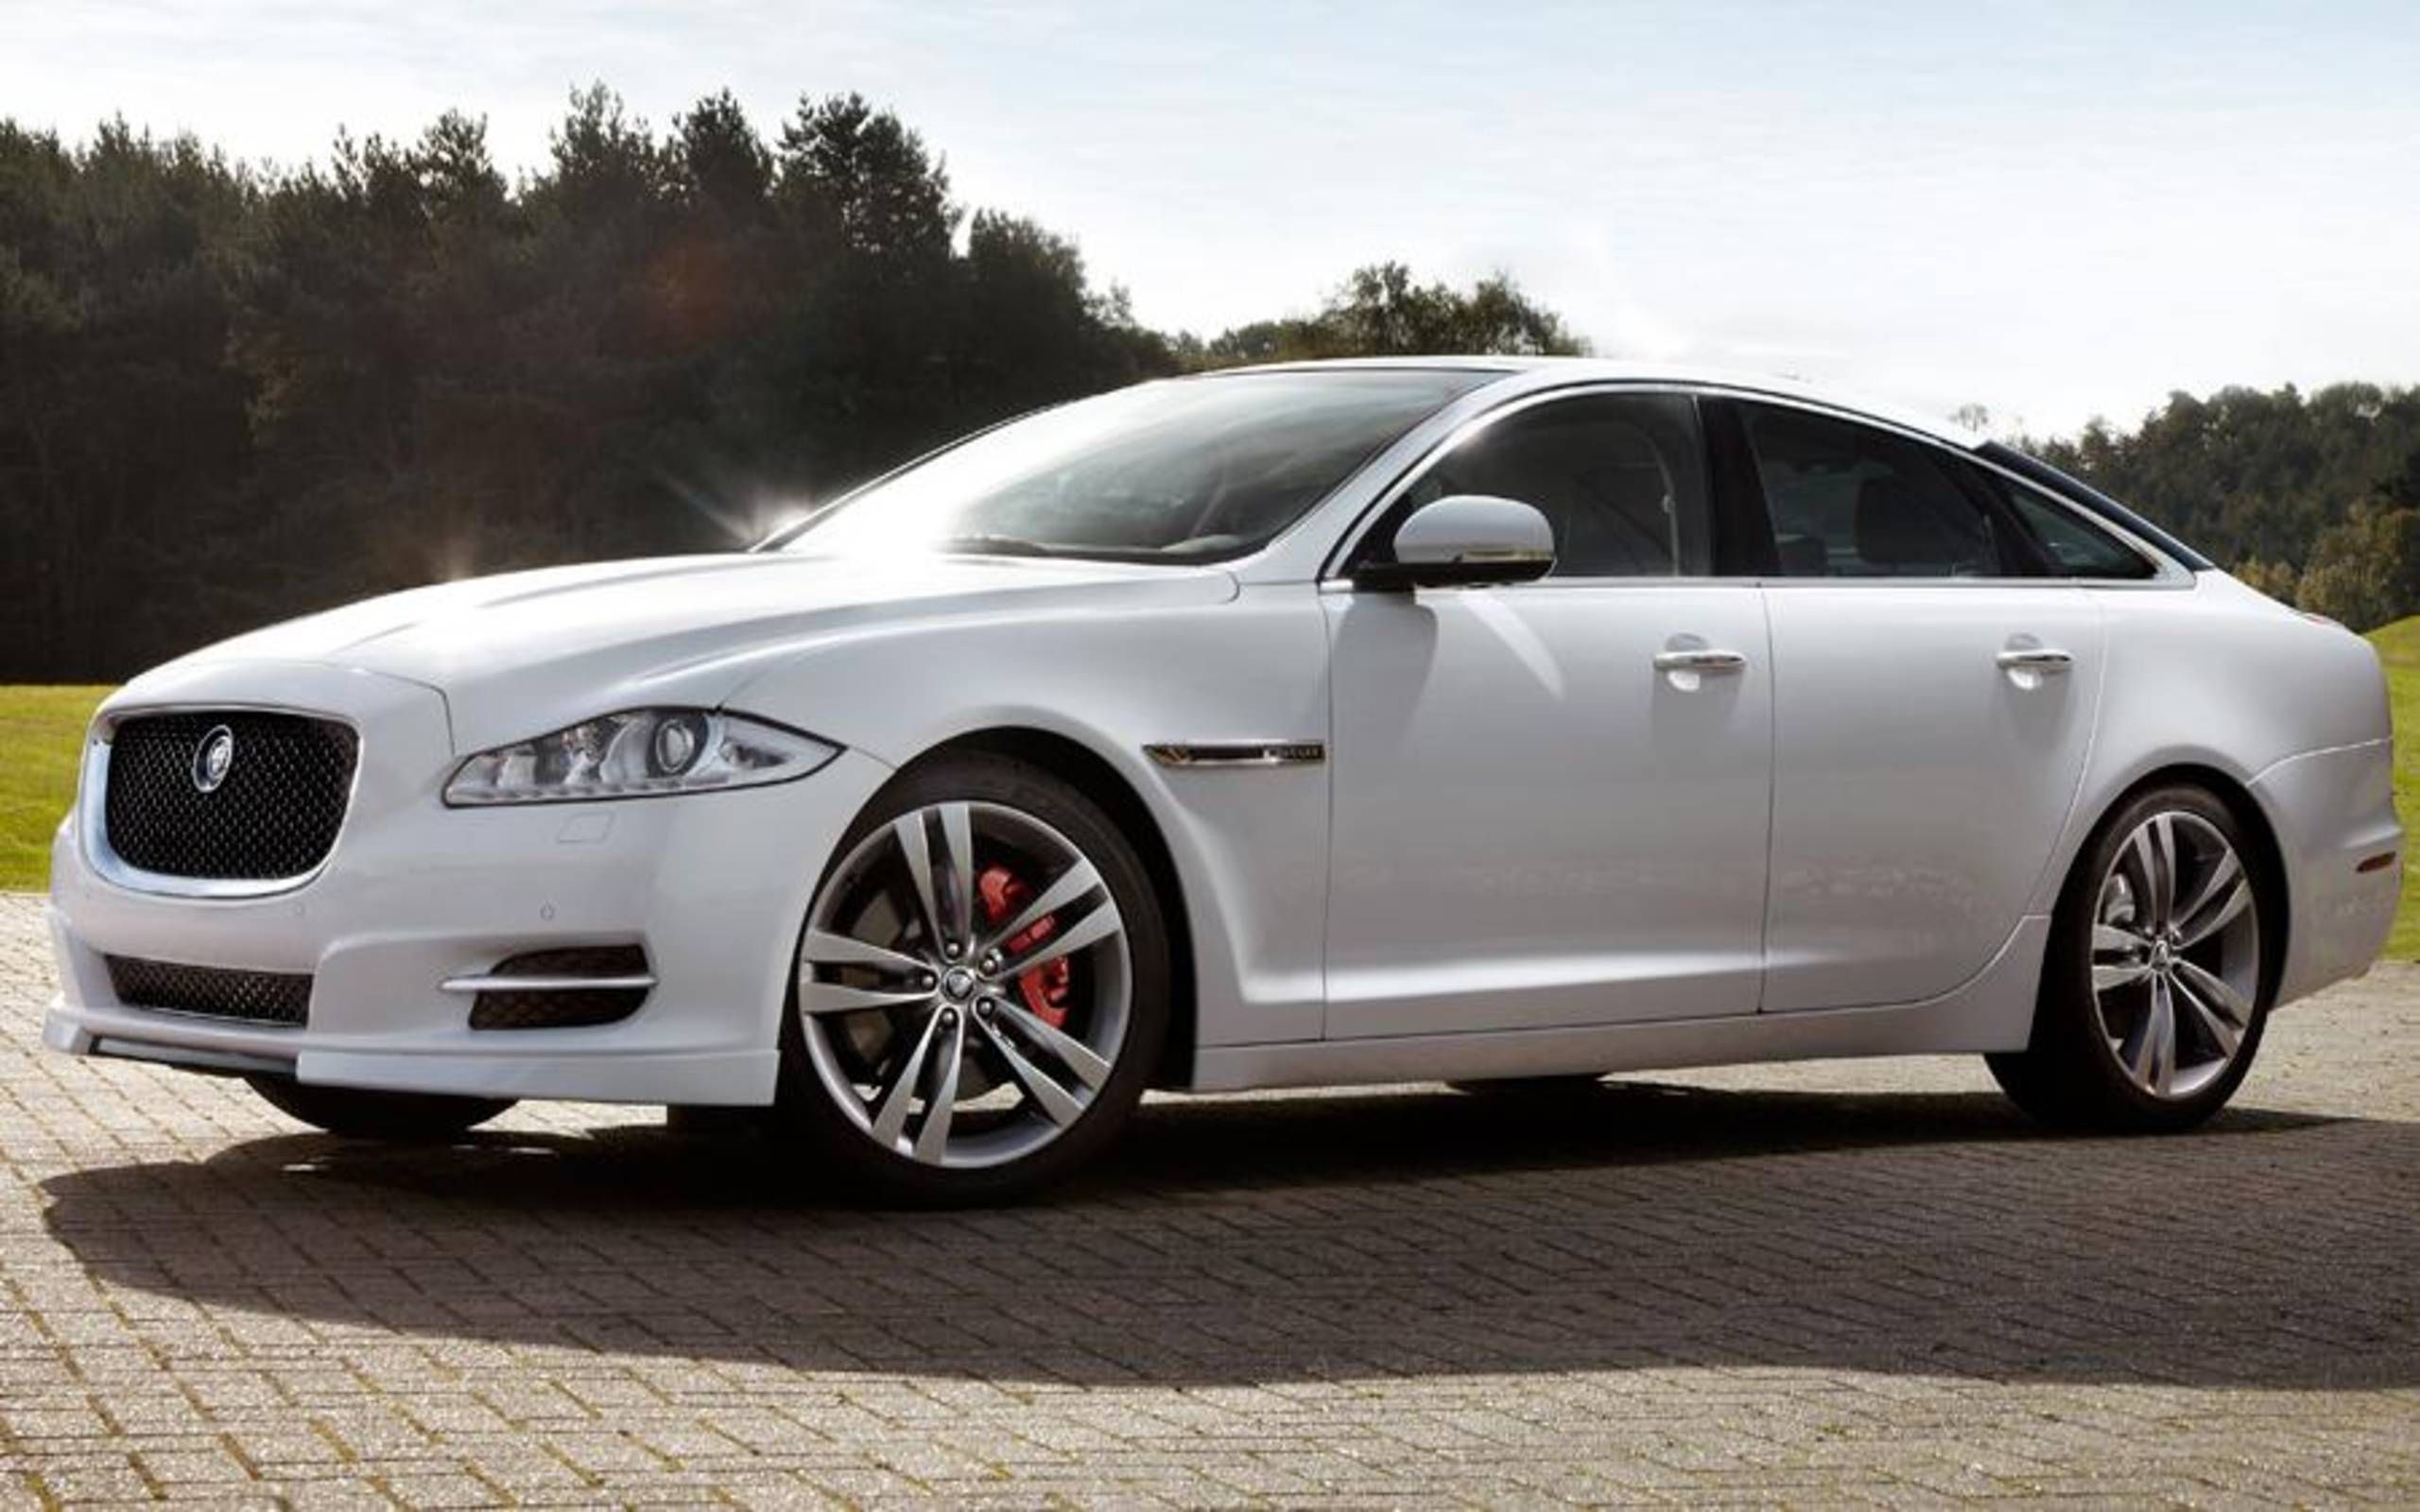 2012 Jaguar XJL Supersport: Review notes: Fat-cat luxury and speed